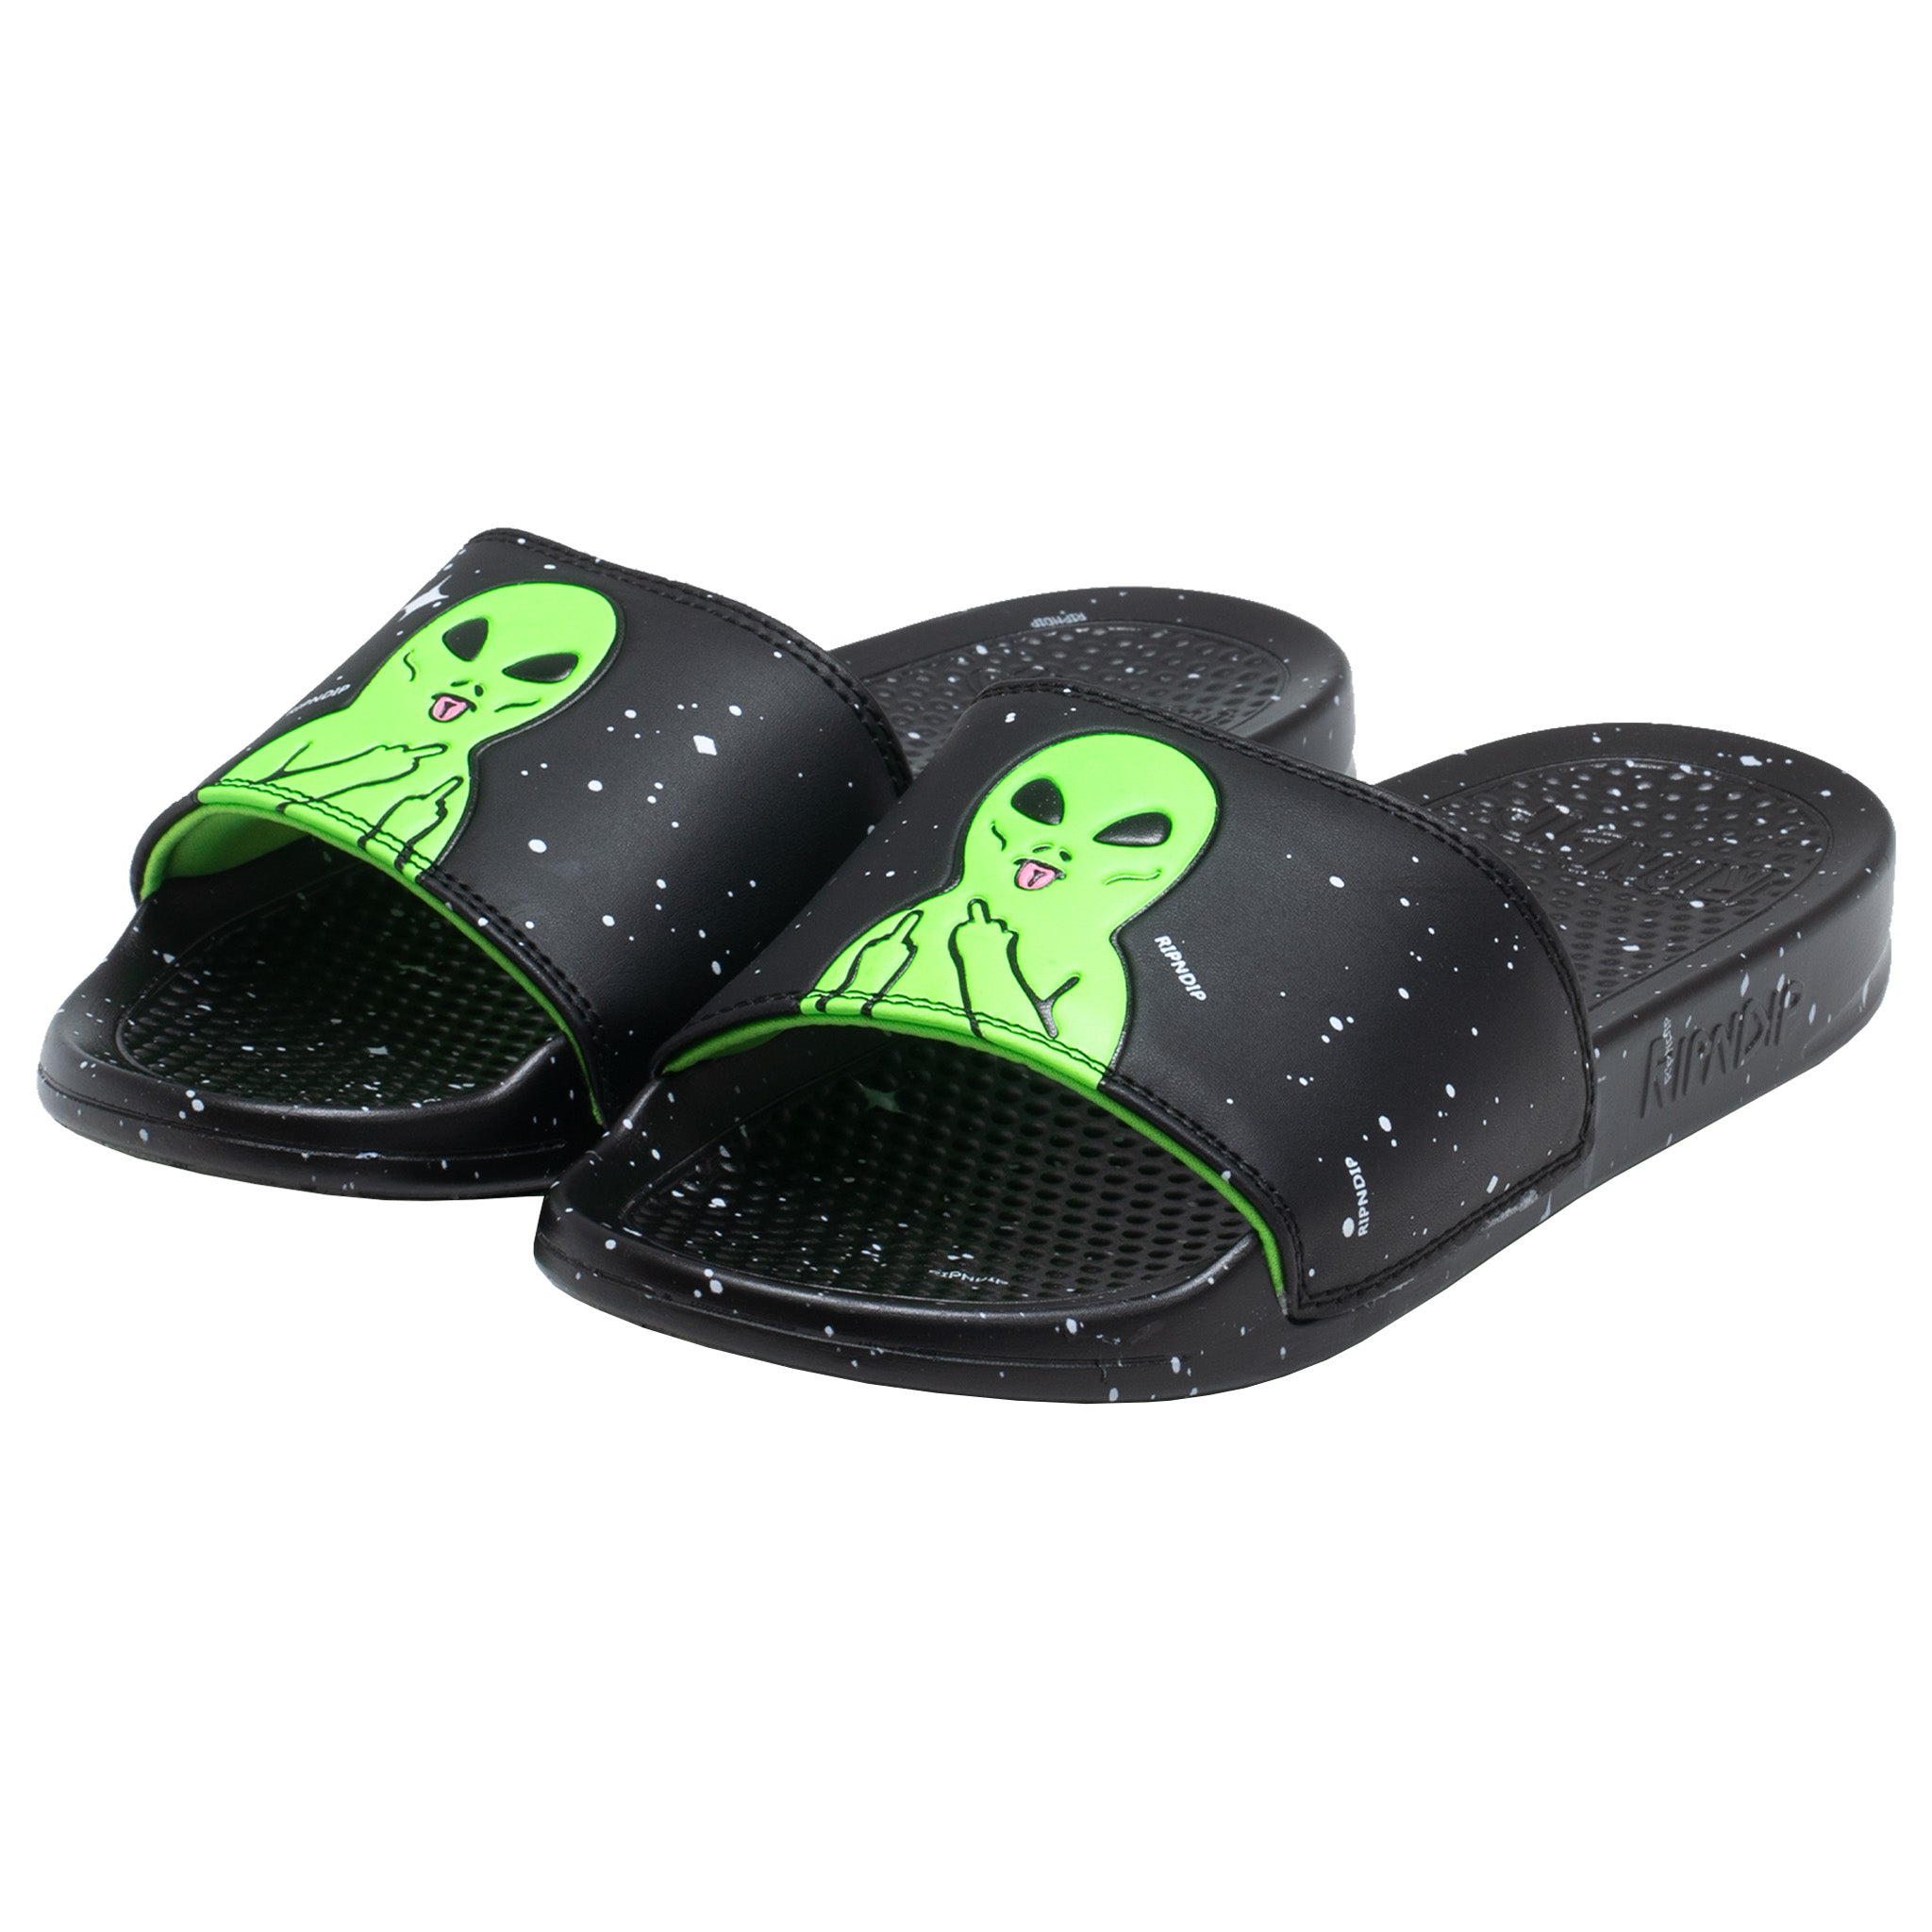 We Out Here Slides (Black/Neon Green)